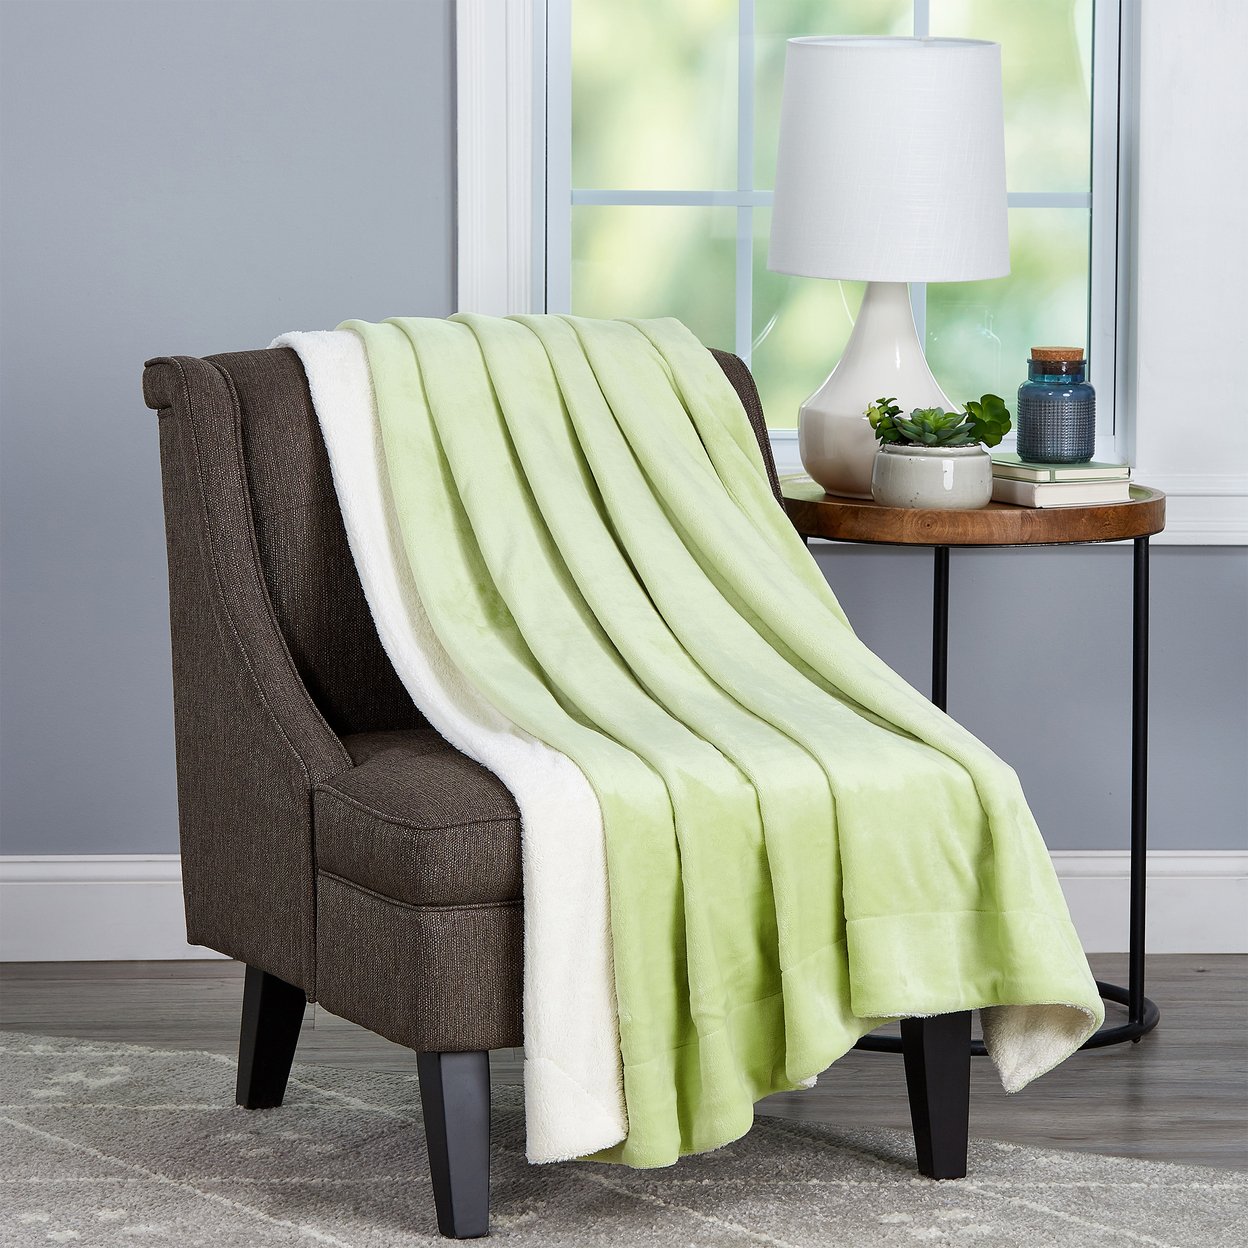 XL Soft Snuggly 70 X 60 Oversized Throw Couch Chair Blanket